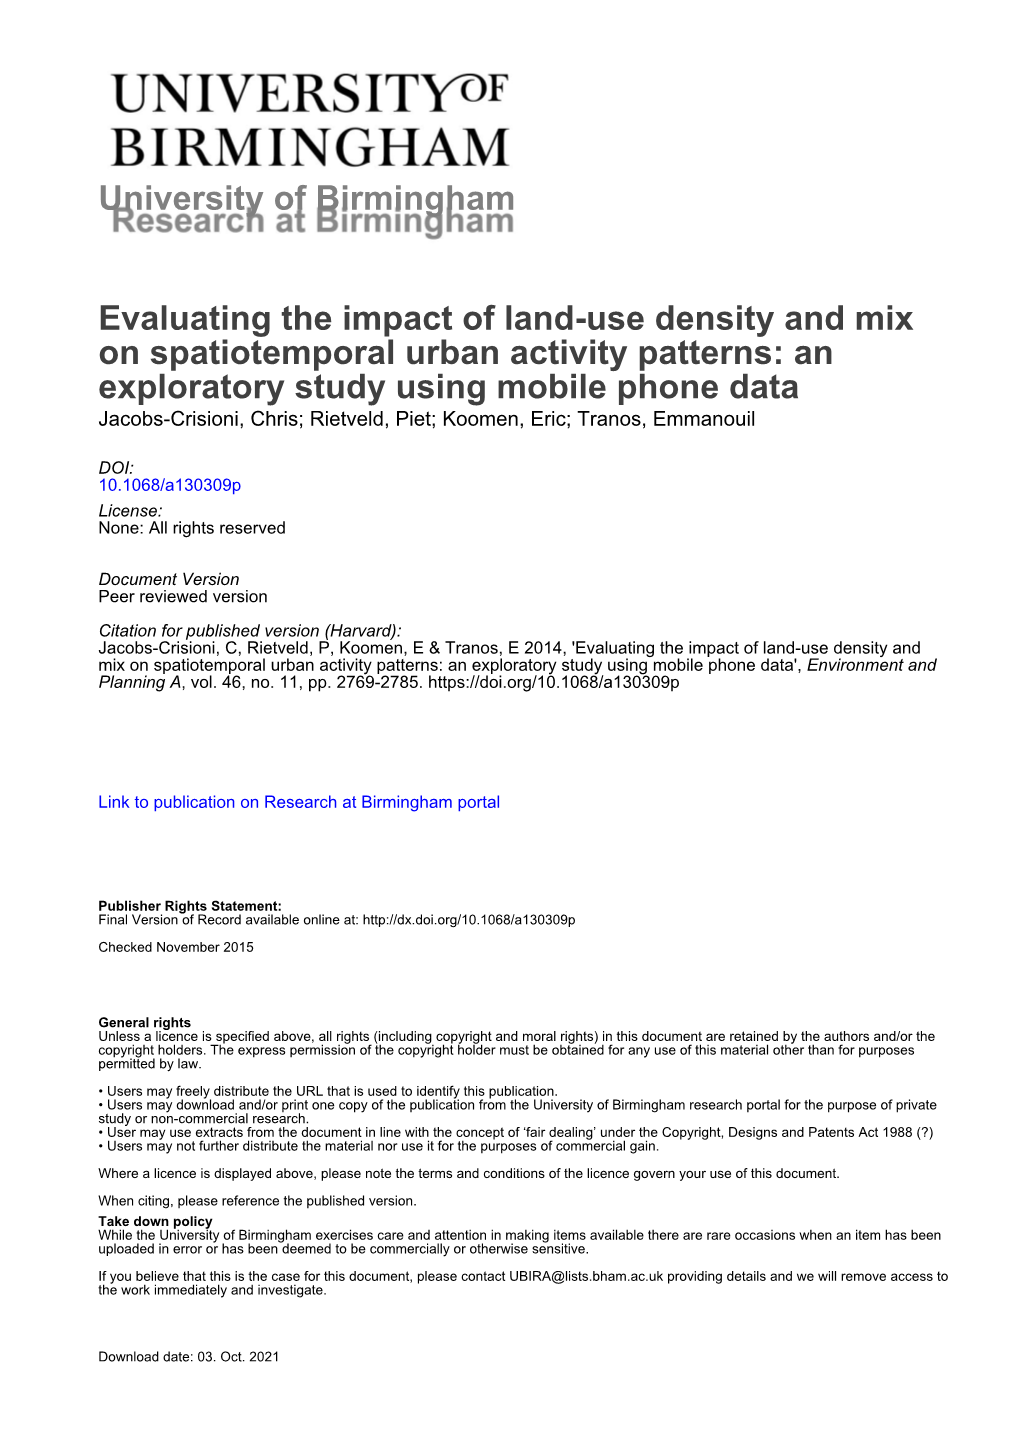 Evaluating the Impact of Land-Use Density and Mix on Spatiotemporal